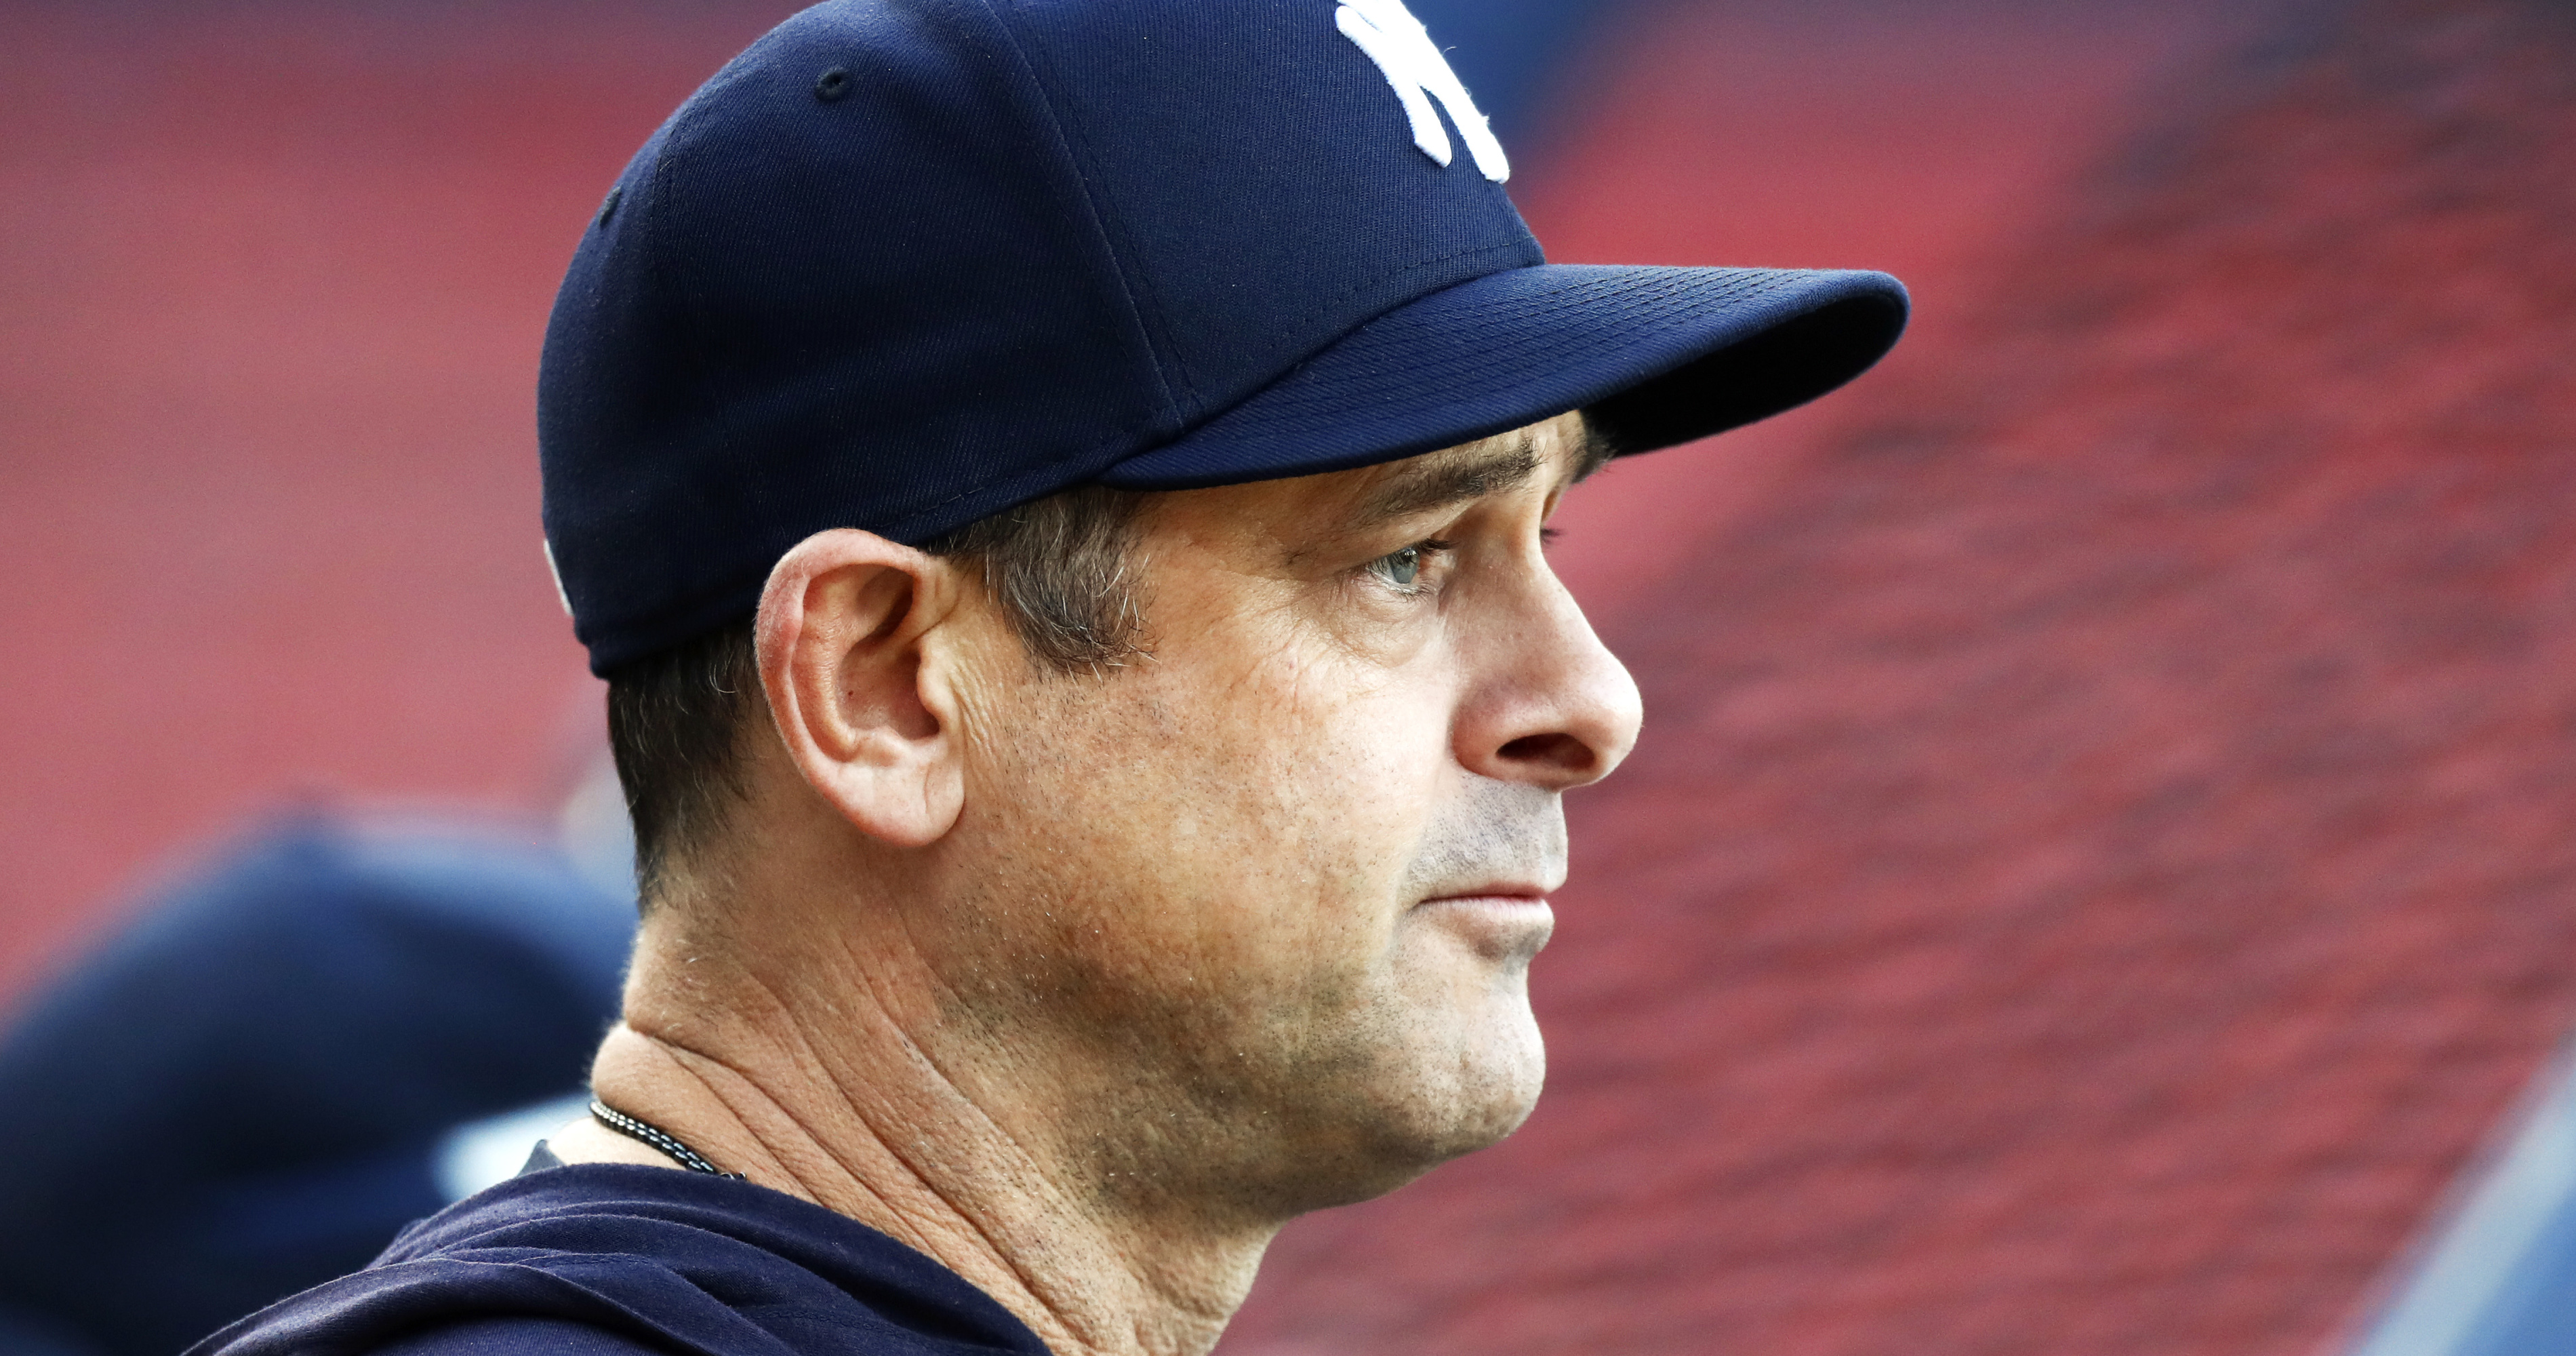 MLB playoffs: Yankees manager Aaron Boone questioned after Red Sox rout